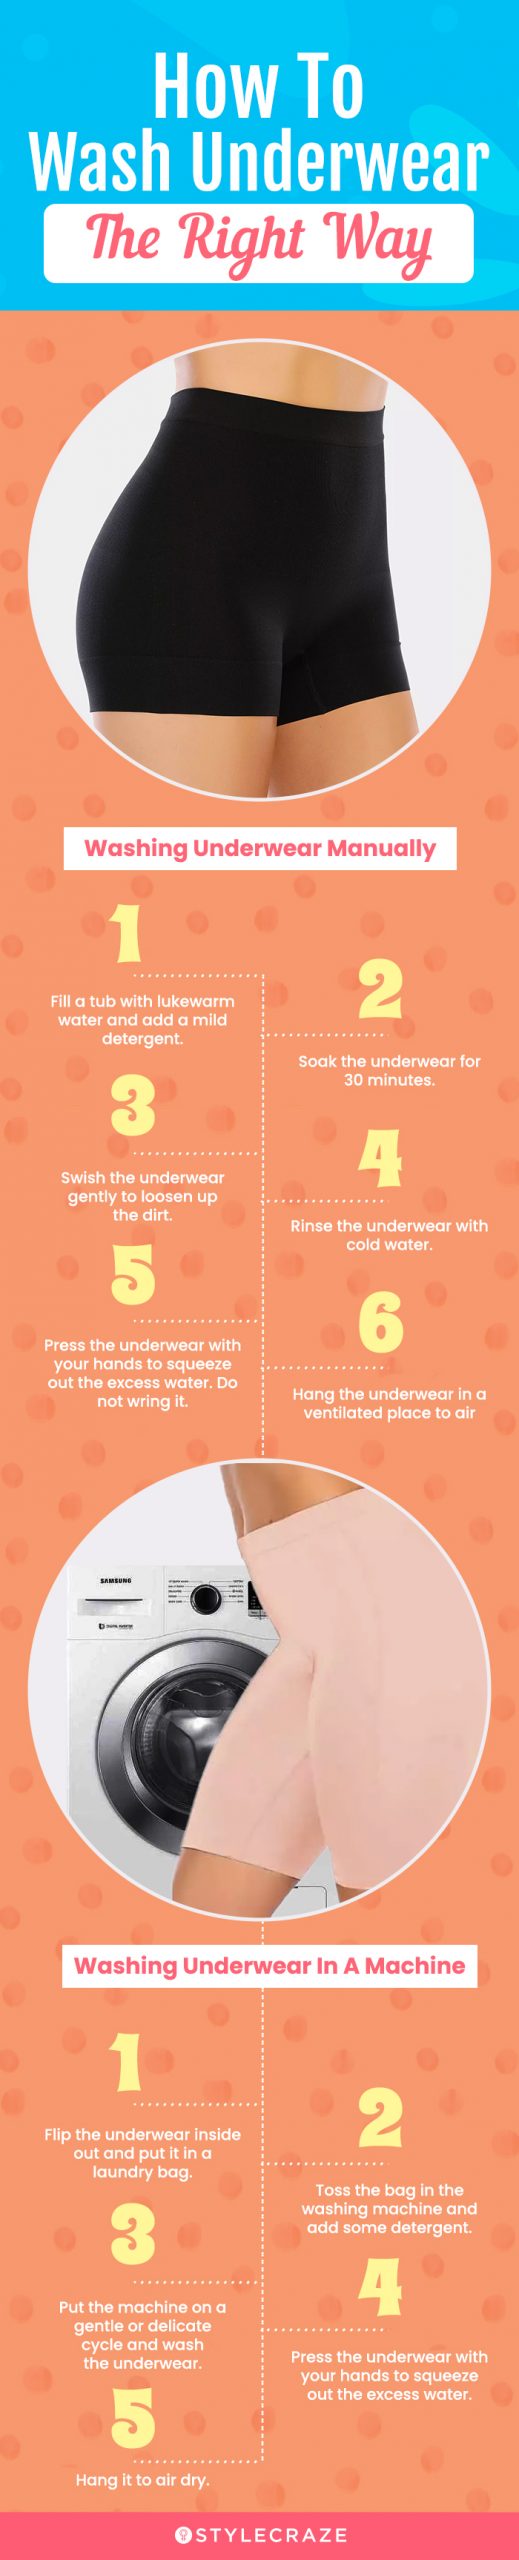 How To Wash Underwear The Right Way (infographic)